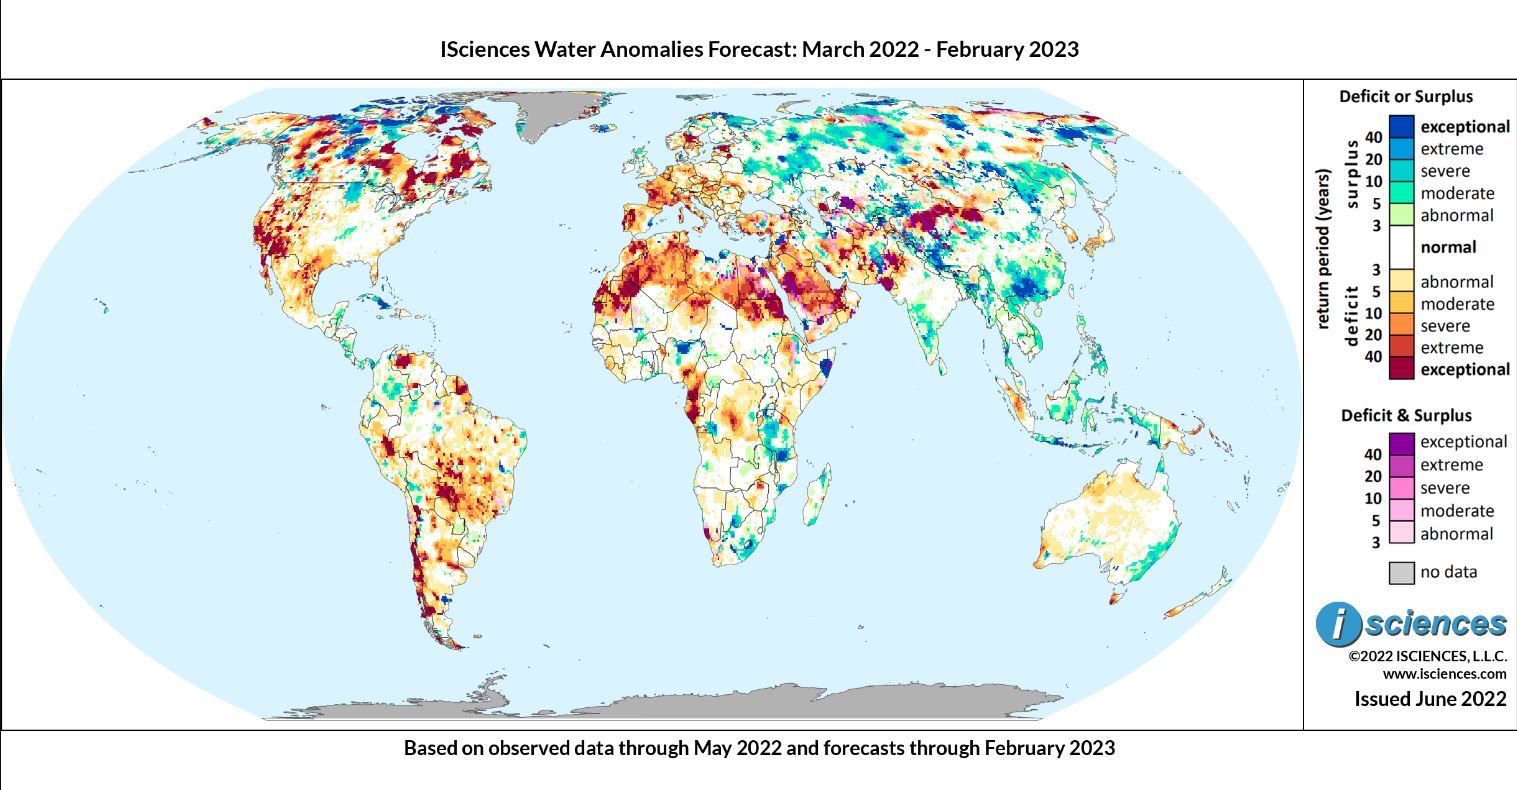 This map from ISciences Water Security Indicator Model presents a selection of regions likely to encounter significant water anomalies during the one-year period beginning in March 2022 and running through February 2023 